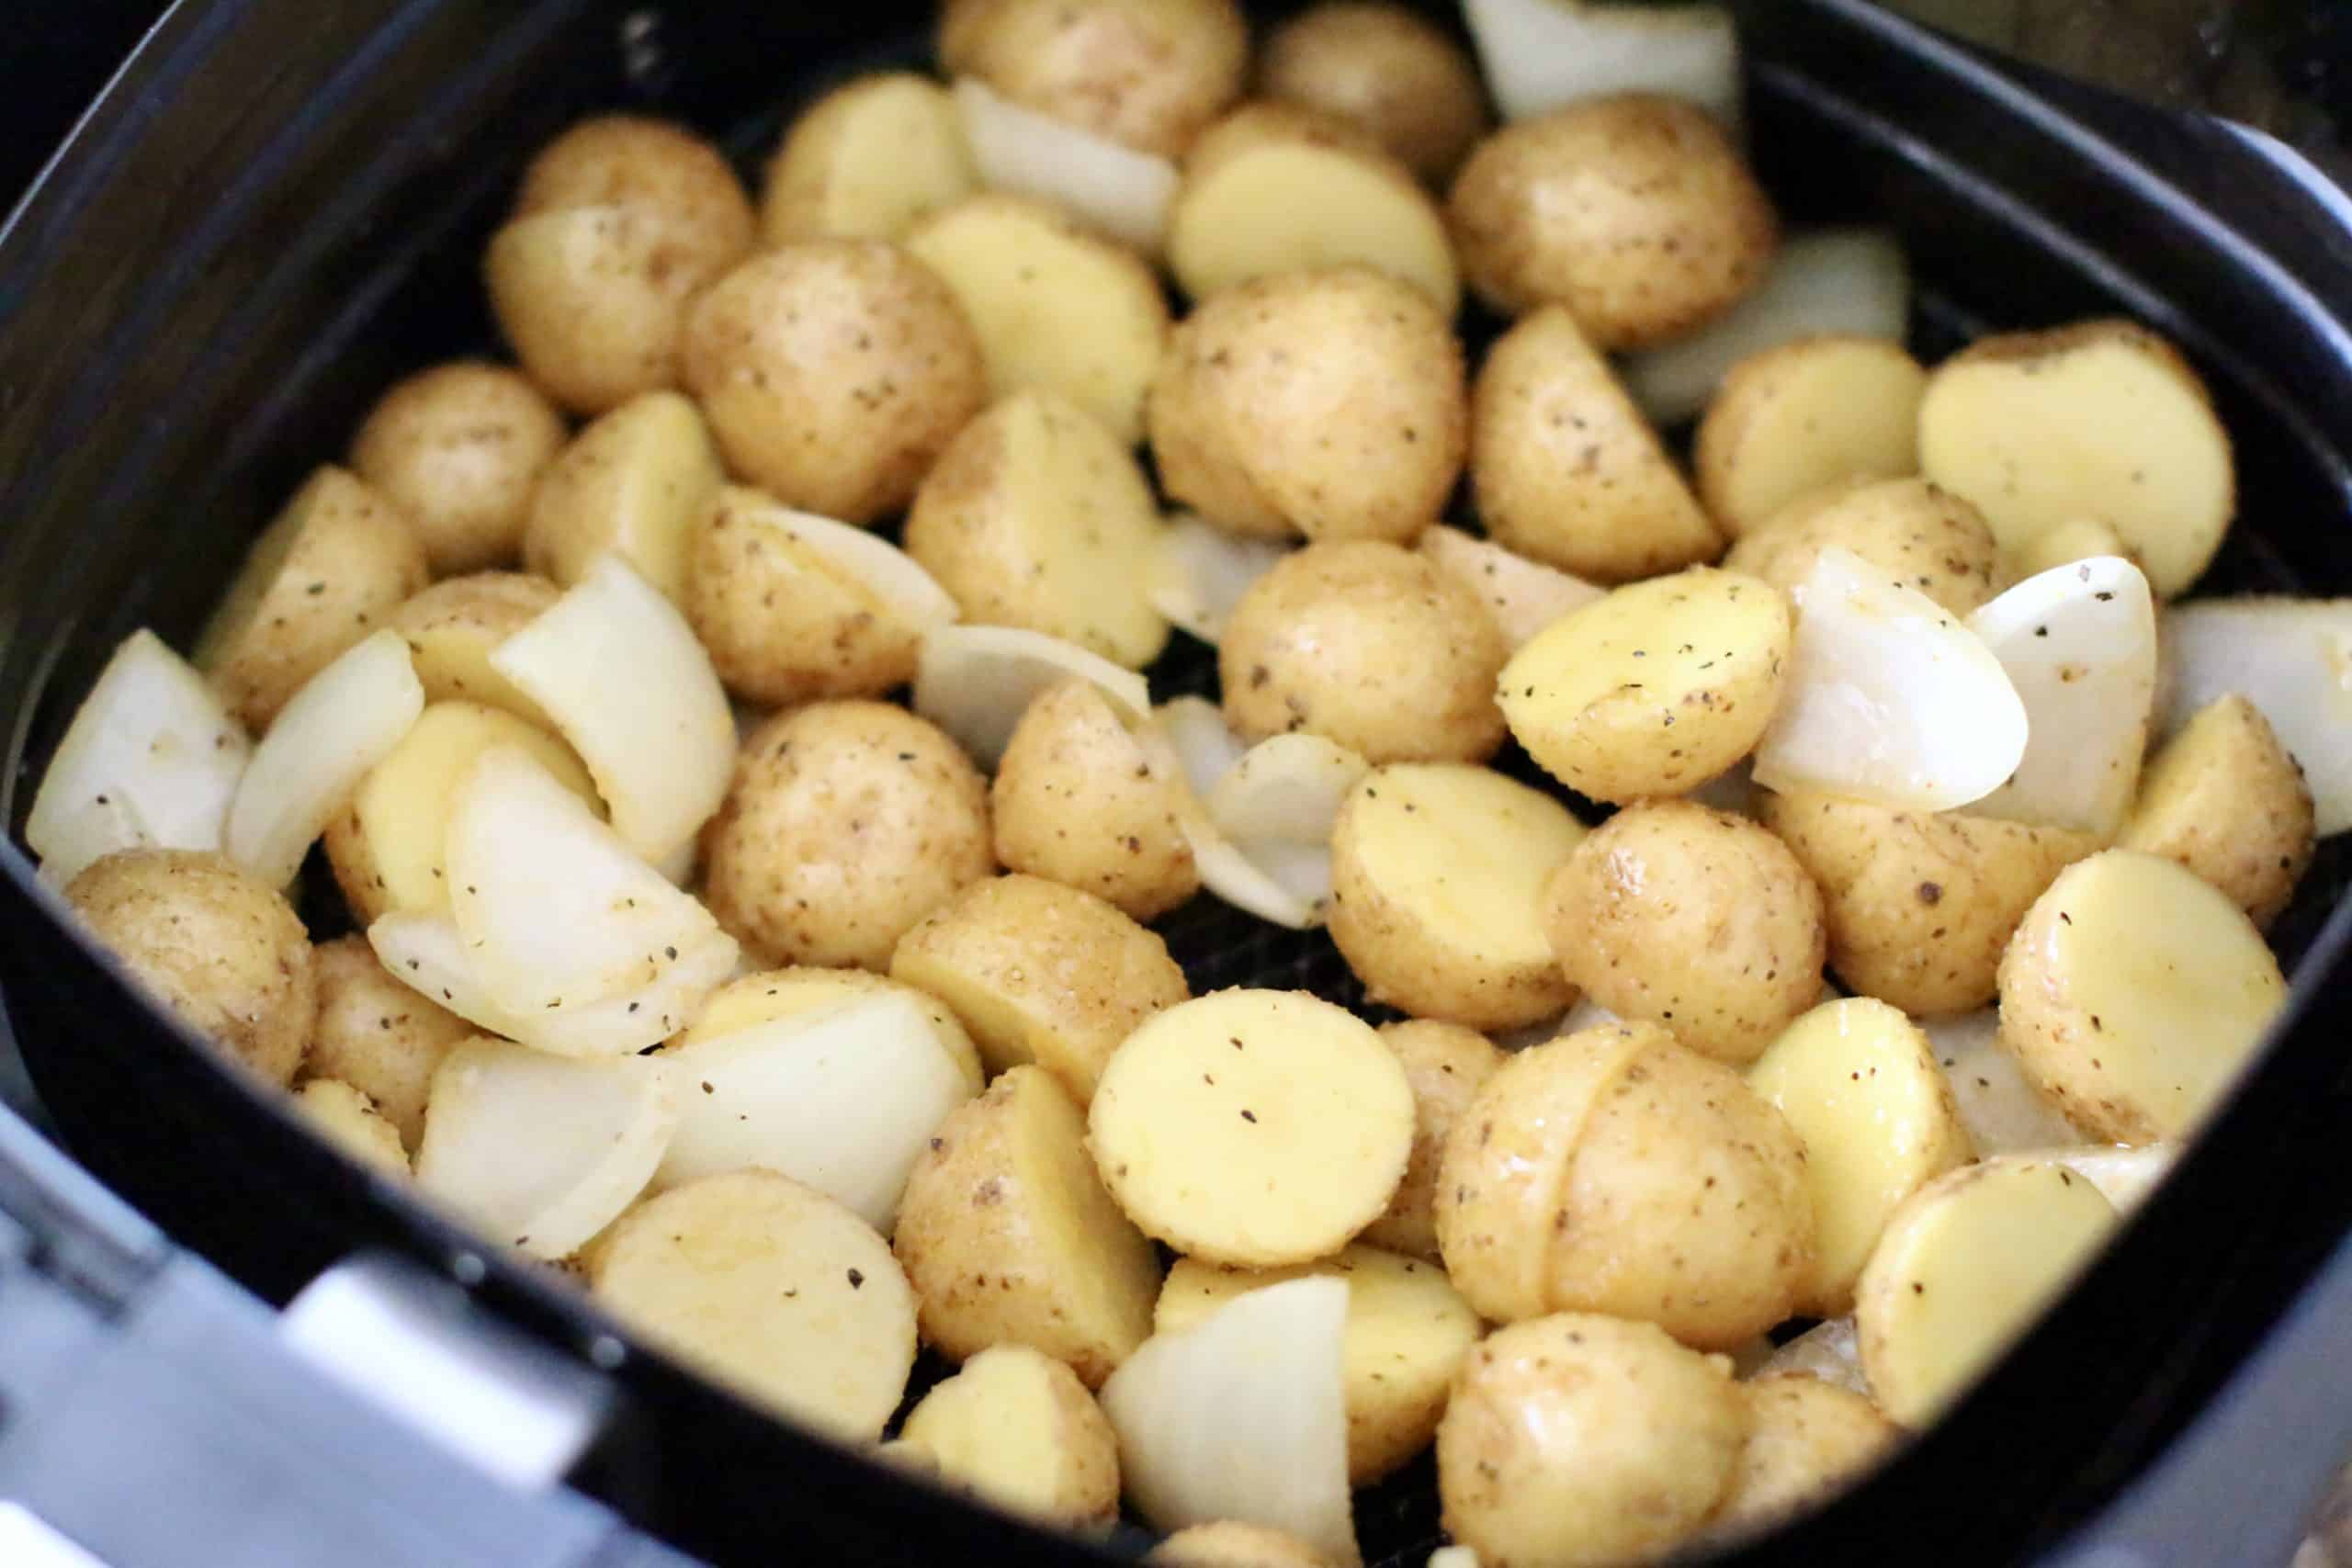 seasoned potatoes and onions in the basket of a 6-quart air fryer.